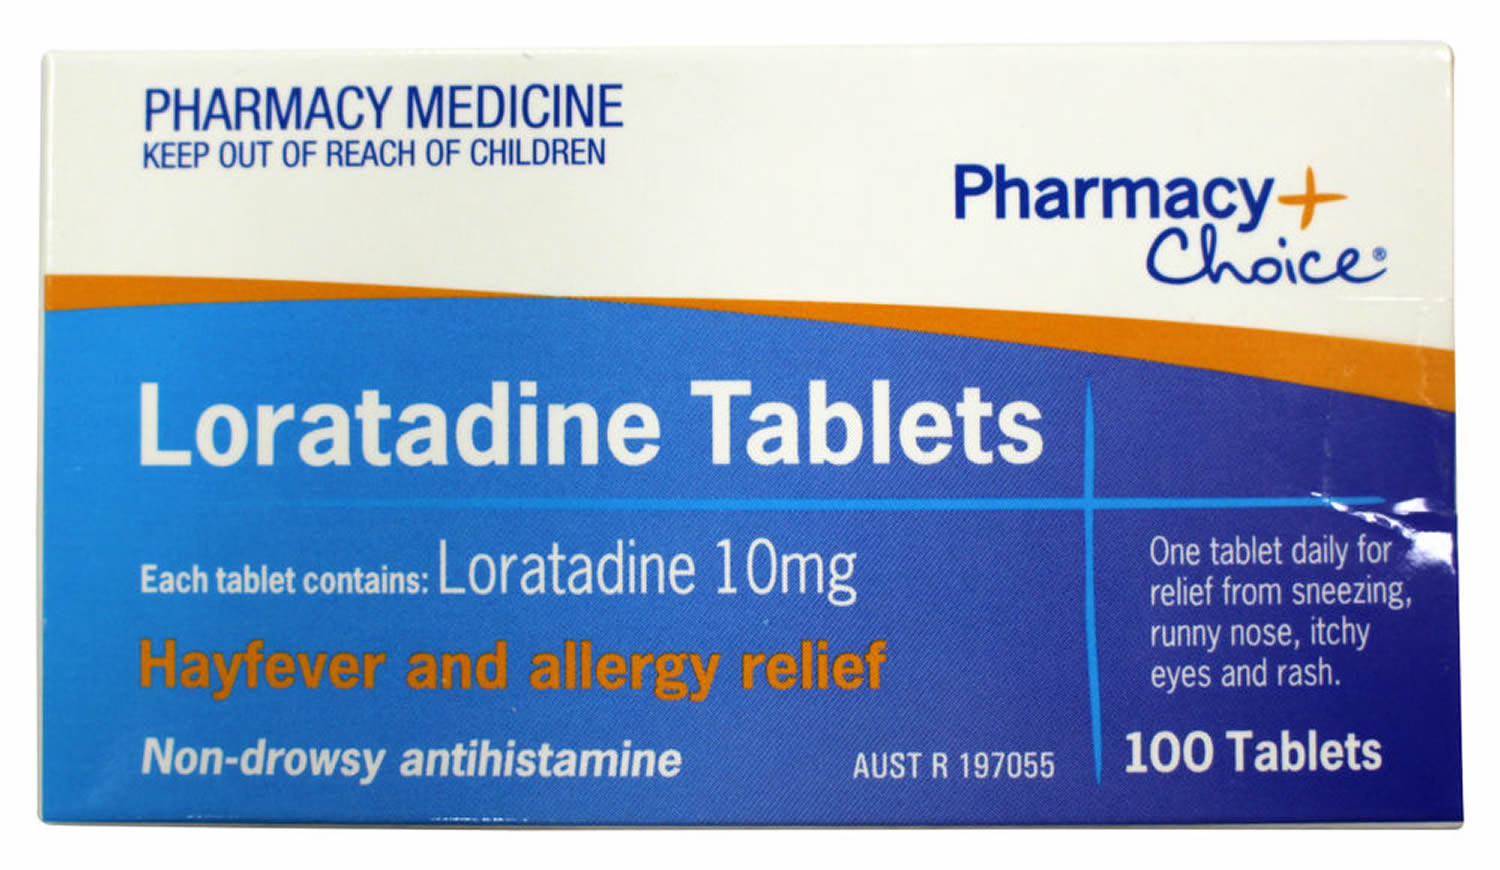 Loratadine Tablet Uses Benefits and Symptoms Side Effects